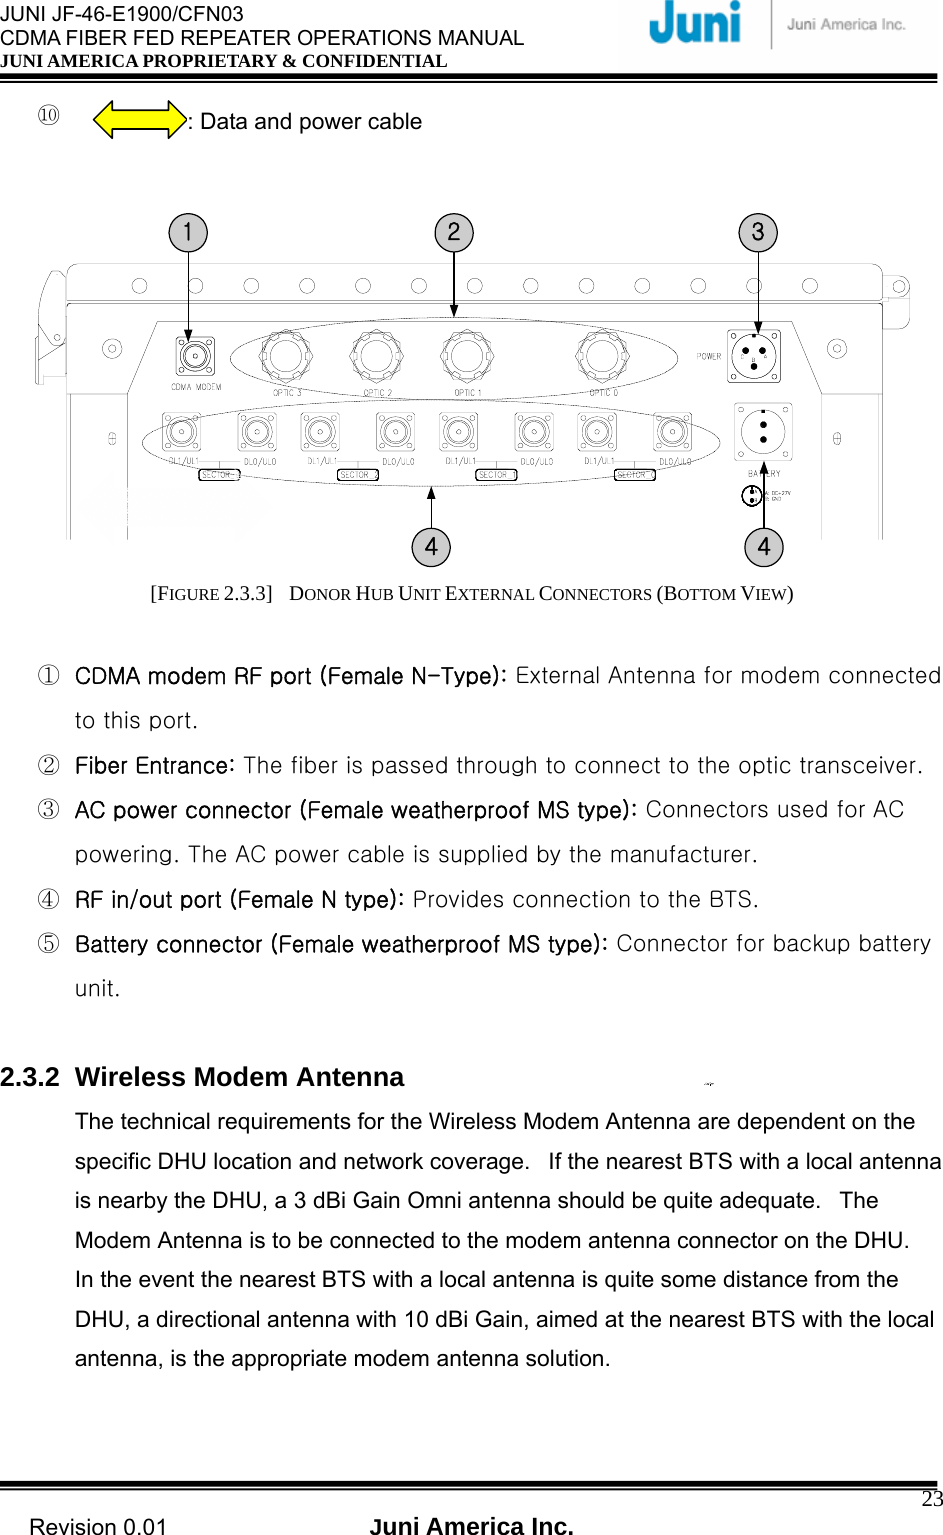  JUNI JF-46-E1900/CFN03 CDMA FIBER FED REPEATER OPERATIONS MANUAL JUNI AMERICA PROPRIETARY &amp; CONFIDENTIAL                                   Revision 0.01  Juni America Inc.  23⑩     1 2 34 4 [FIGURE 2.3.3]  DONOR HUB UNIT EXTERNAL CONNECTORS (BOTTOM VIEW)   ①  CDMA modem RF port (Female N-Type): External Antenna for modem connected to this port. ②  Fiber Entrance: The fiber is passed through to connect to the optic transceiver. ③  AC power connector (Female weatherproof MS type): Connectors used for AC powering. The AC power cable is supplied by the manufacturer. ④  RF in/out port (Female N type): Provides connection to the BTS. ⑤  Battery connector (Female weatherproof MS type): Connector for backup battery unit.  2.3.2 Wireless Modem Antenna The technical requirements for the Wireless Modem Antenna are dependent on the specific DHU location and network coverage.   If the nearest BTS with a local antenna is nearby the DHU, a 3 dBi Gain Omni antenna should be quite adequate.   The Modem Antenna is to be connected to the modem antenna connector on the DHU. In the event the nearest BTS with a local antenna is quite some distance from the DHU, a directional antenna with 10 dBi Gain, aimed at the nearest BTS with the local antenna, is the appropriate modem antenna solution.  : Data and power cable